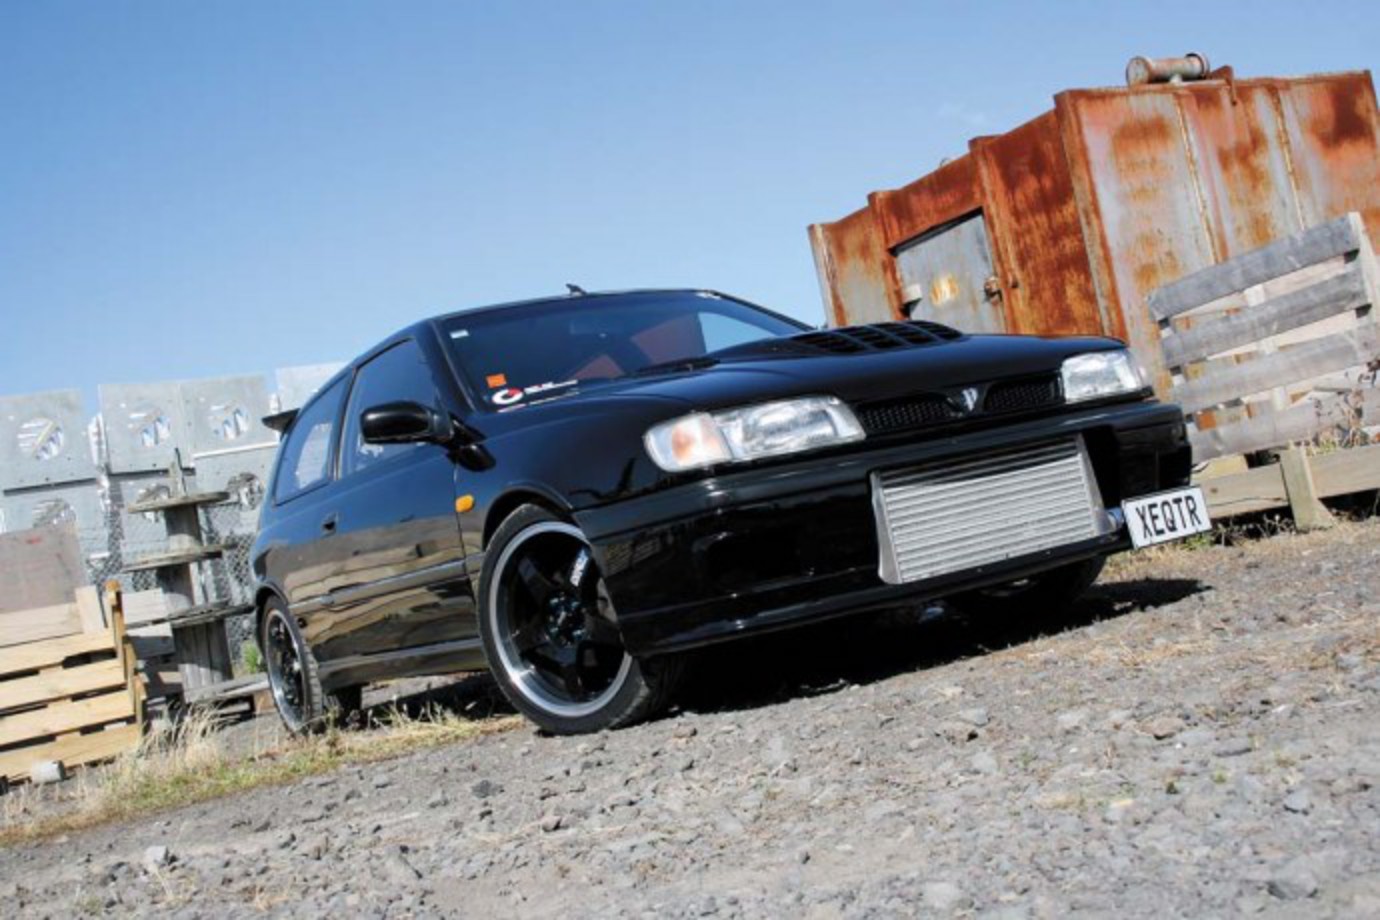 It's a 1991 RNN14 Nissan Pulsar GTI-R that I bought on the spur of the